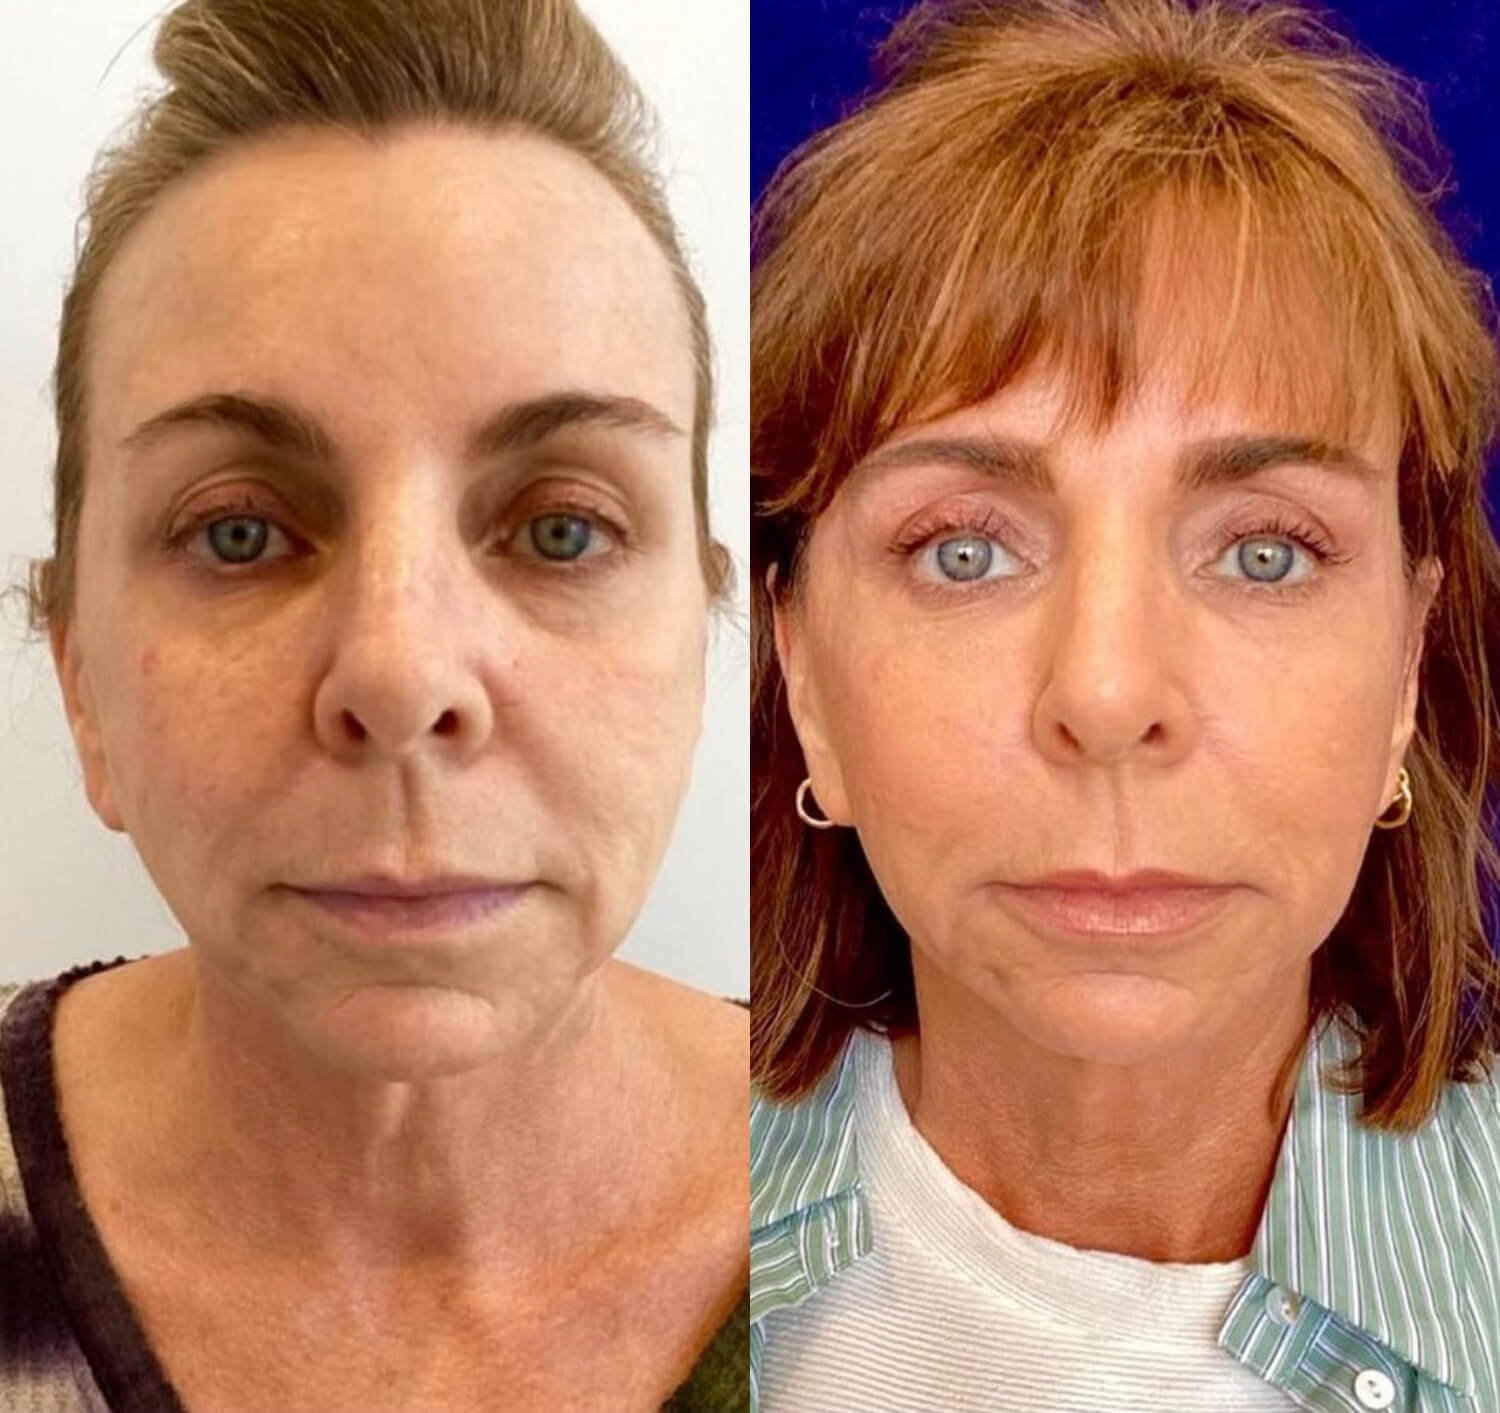 Lisa Azevedo botox for smiles lines before and after.jpg